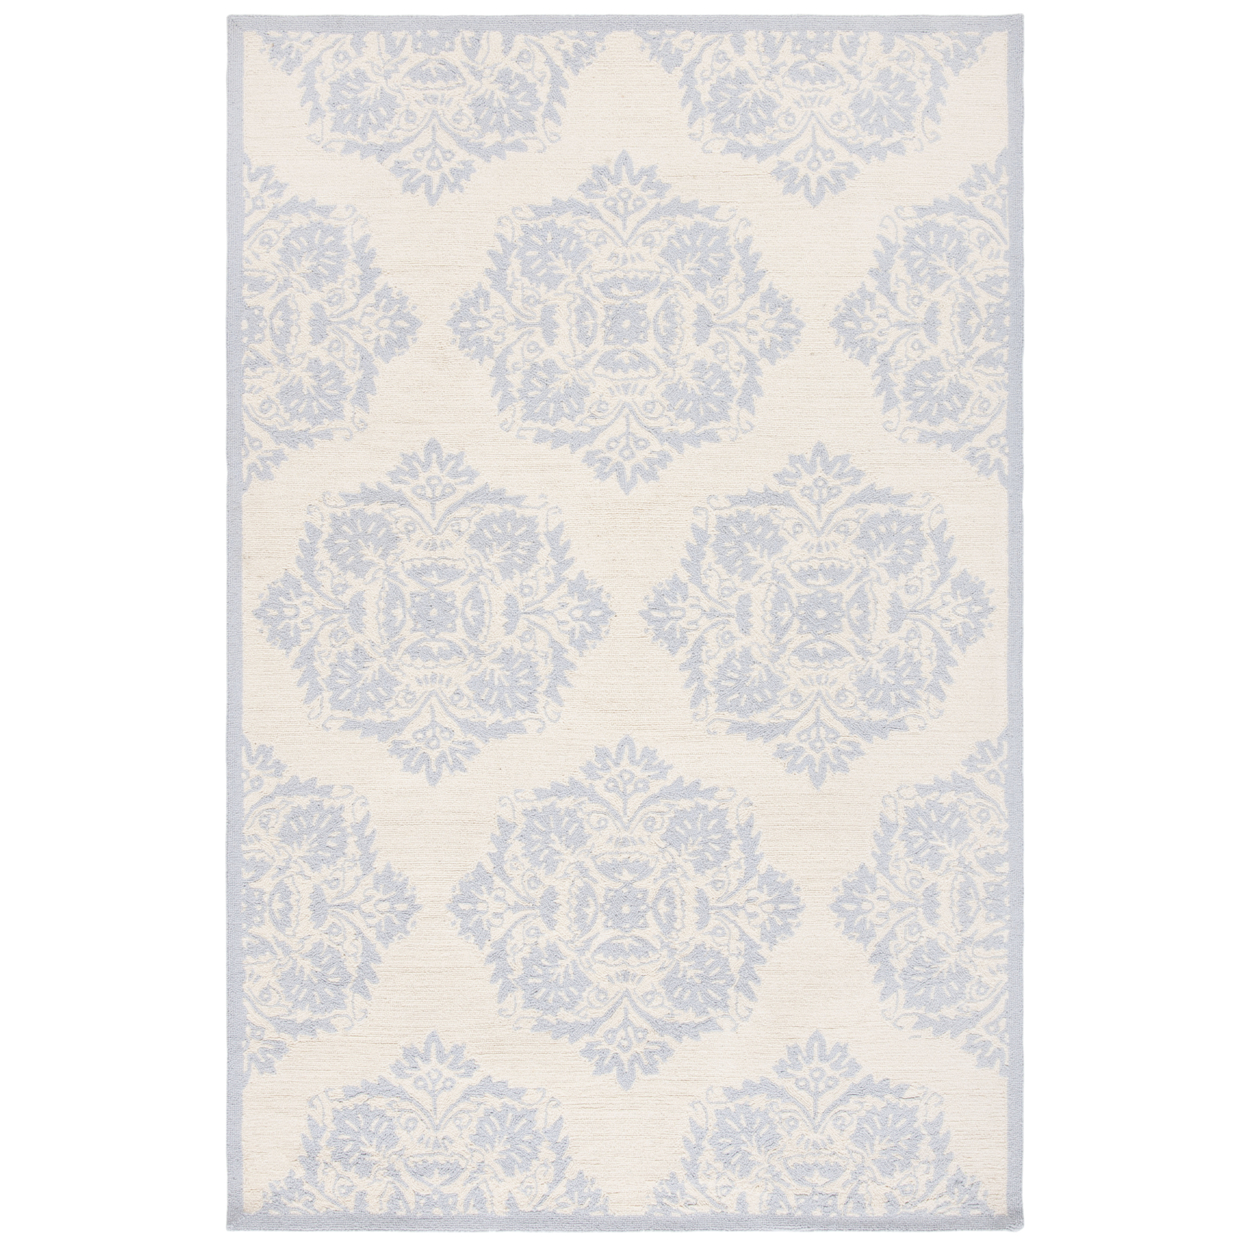 SAFAVIEH Chelsea HK359A Hand-hooked Ivory / Blue Rug - 5' 3 X 8' 3